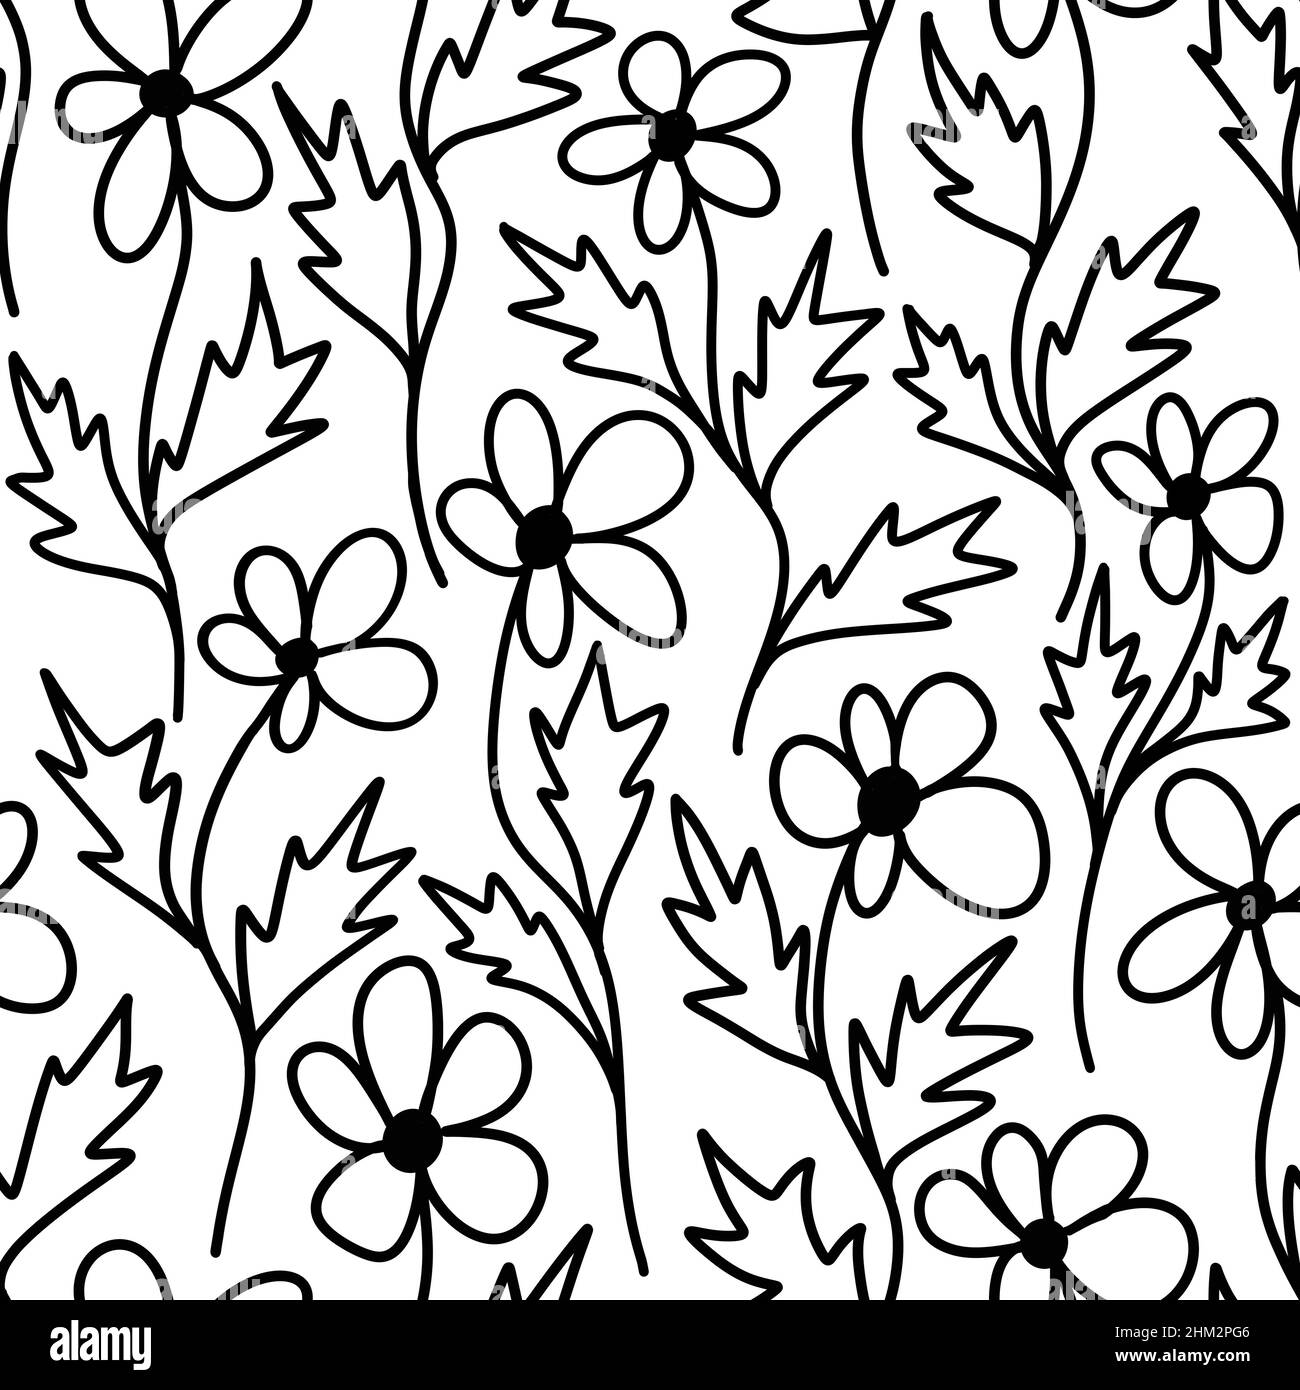 Seamless hand drawn pattern with black and white flowers floral botanical elements, leaves leaf branch blossom. Minimalist monochrome daisy rose peony plants on white background, for textile wallpaper wrapping paper decor Stock Photo